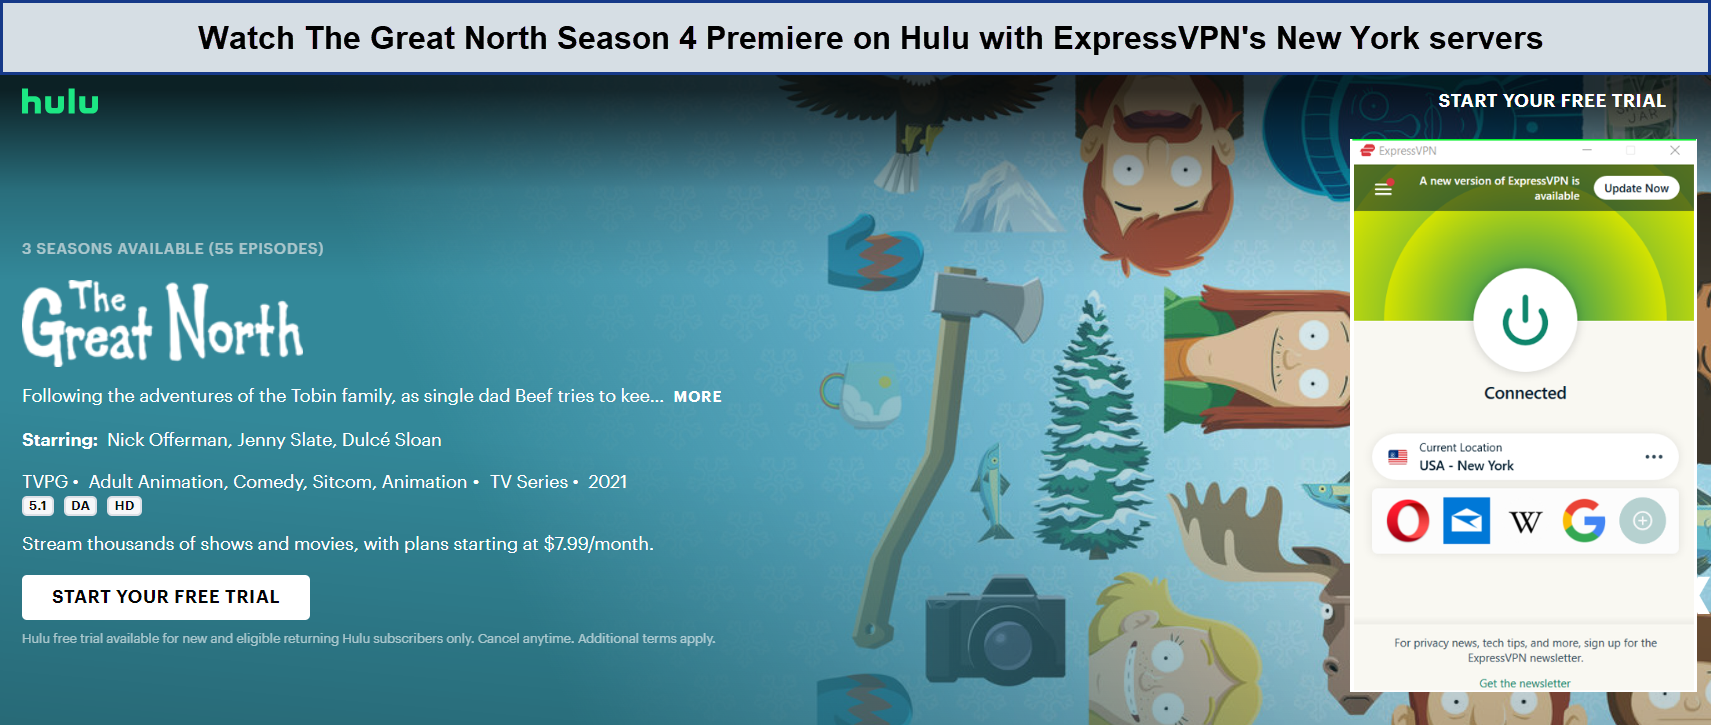 Watch-The-Great-North-Season-4-on-Hulu-with-ExpressVPN-in-New Zealand